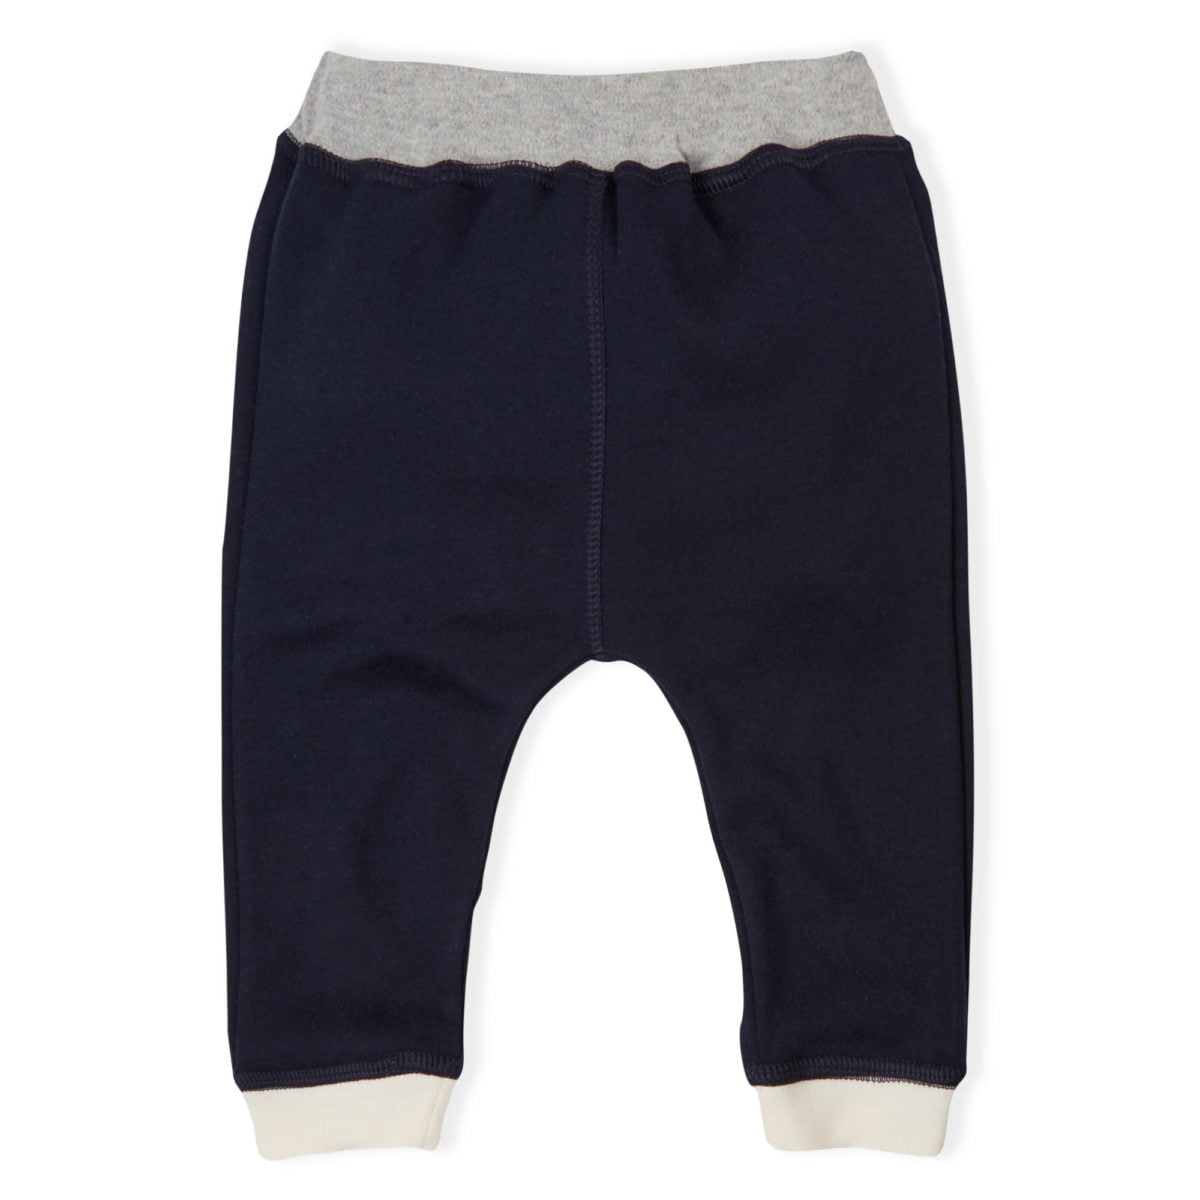 pants navy with cuffs